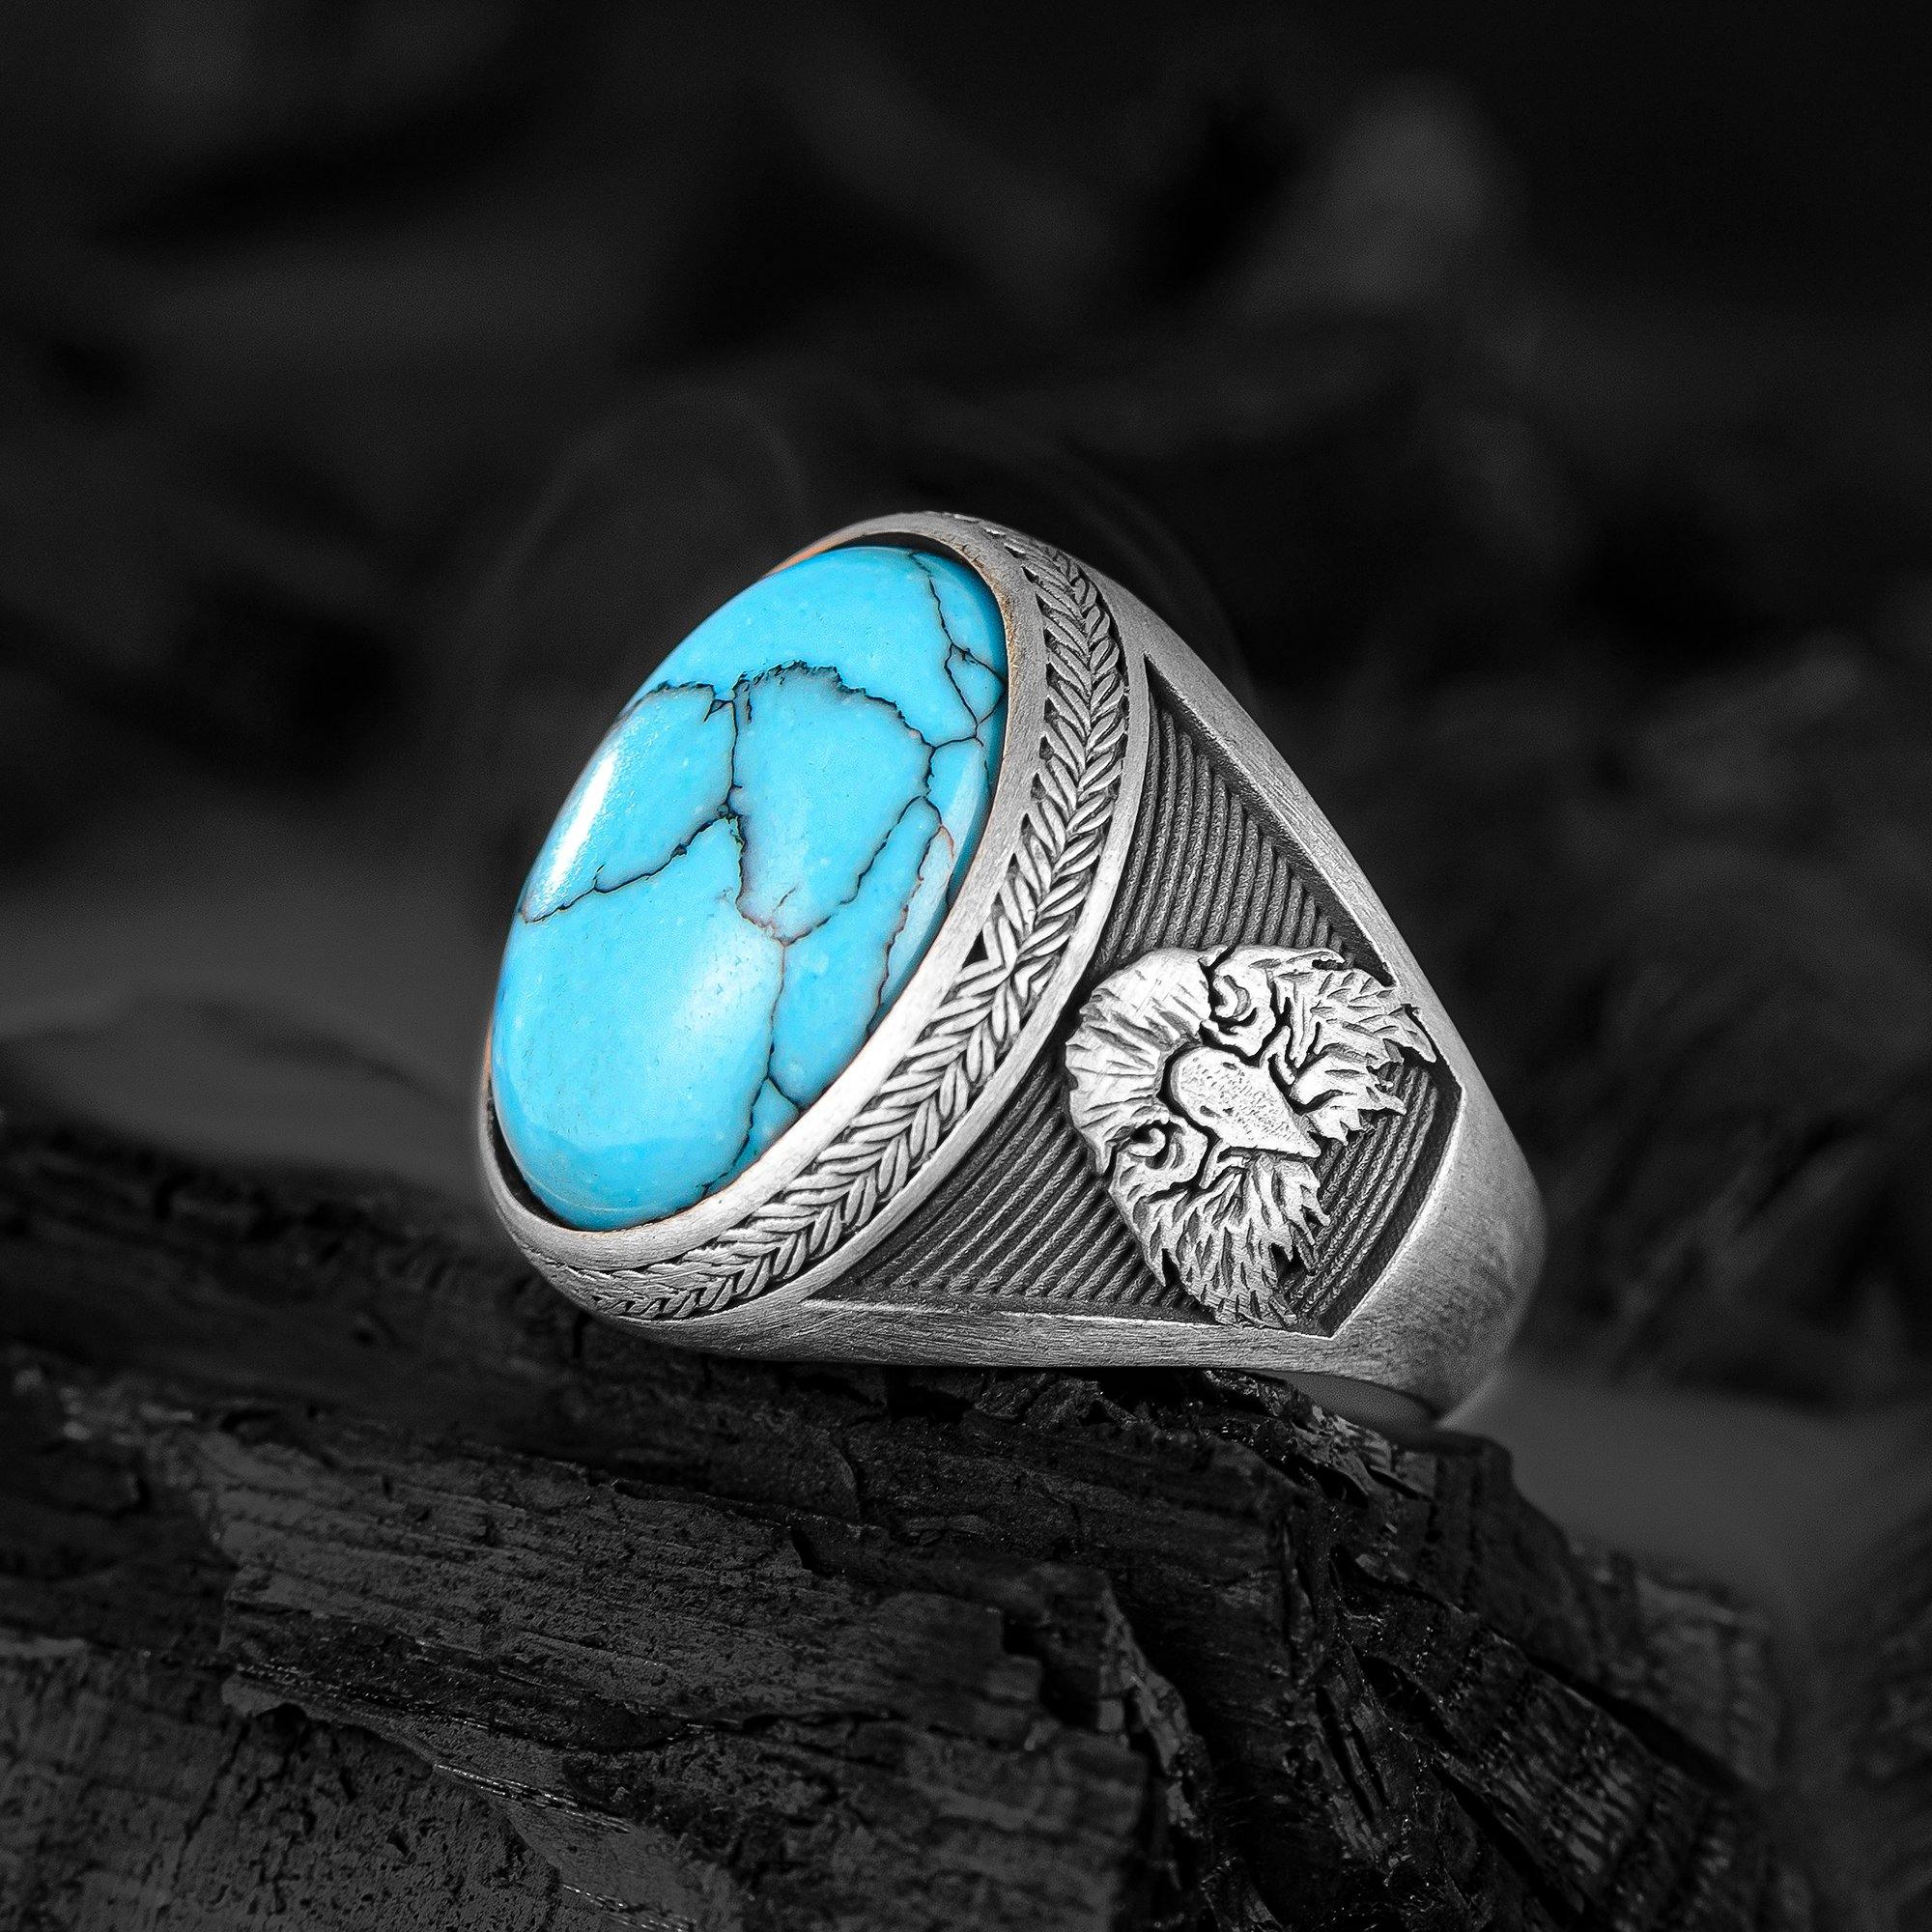 Turquoise Eagle Men's Ring, Oval Gemstone Ring, Handmade Eagle Head Ring - OXO SILVER